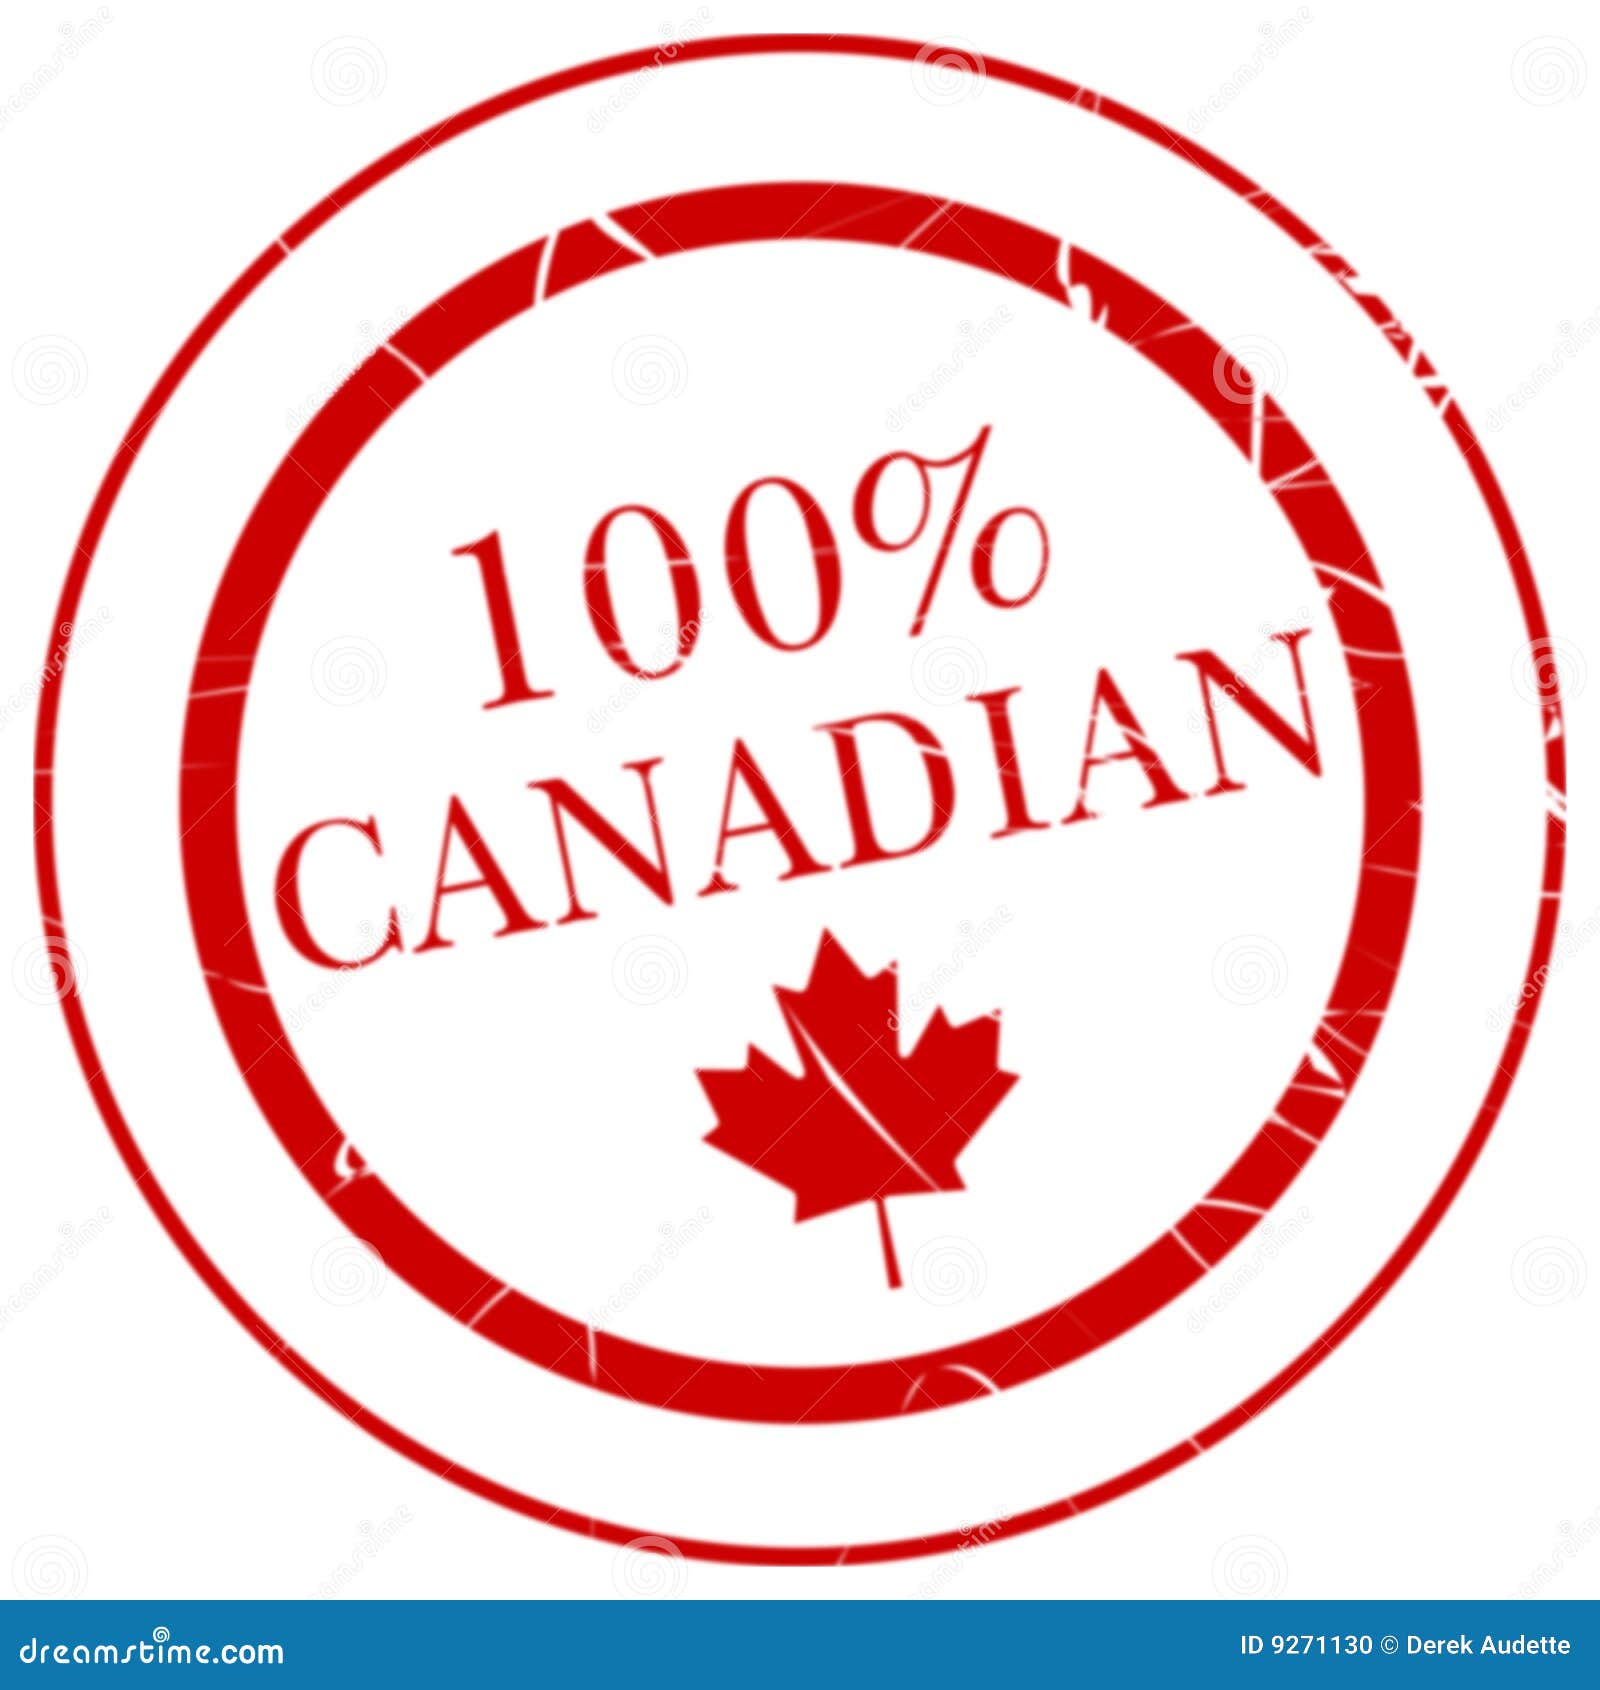 100-canadian-rubber-stamp-9271130.jpg